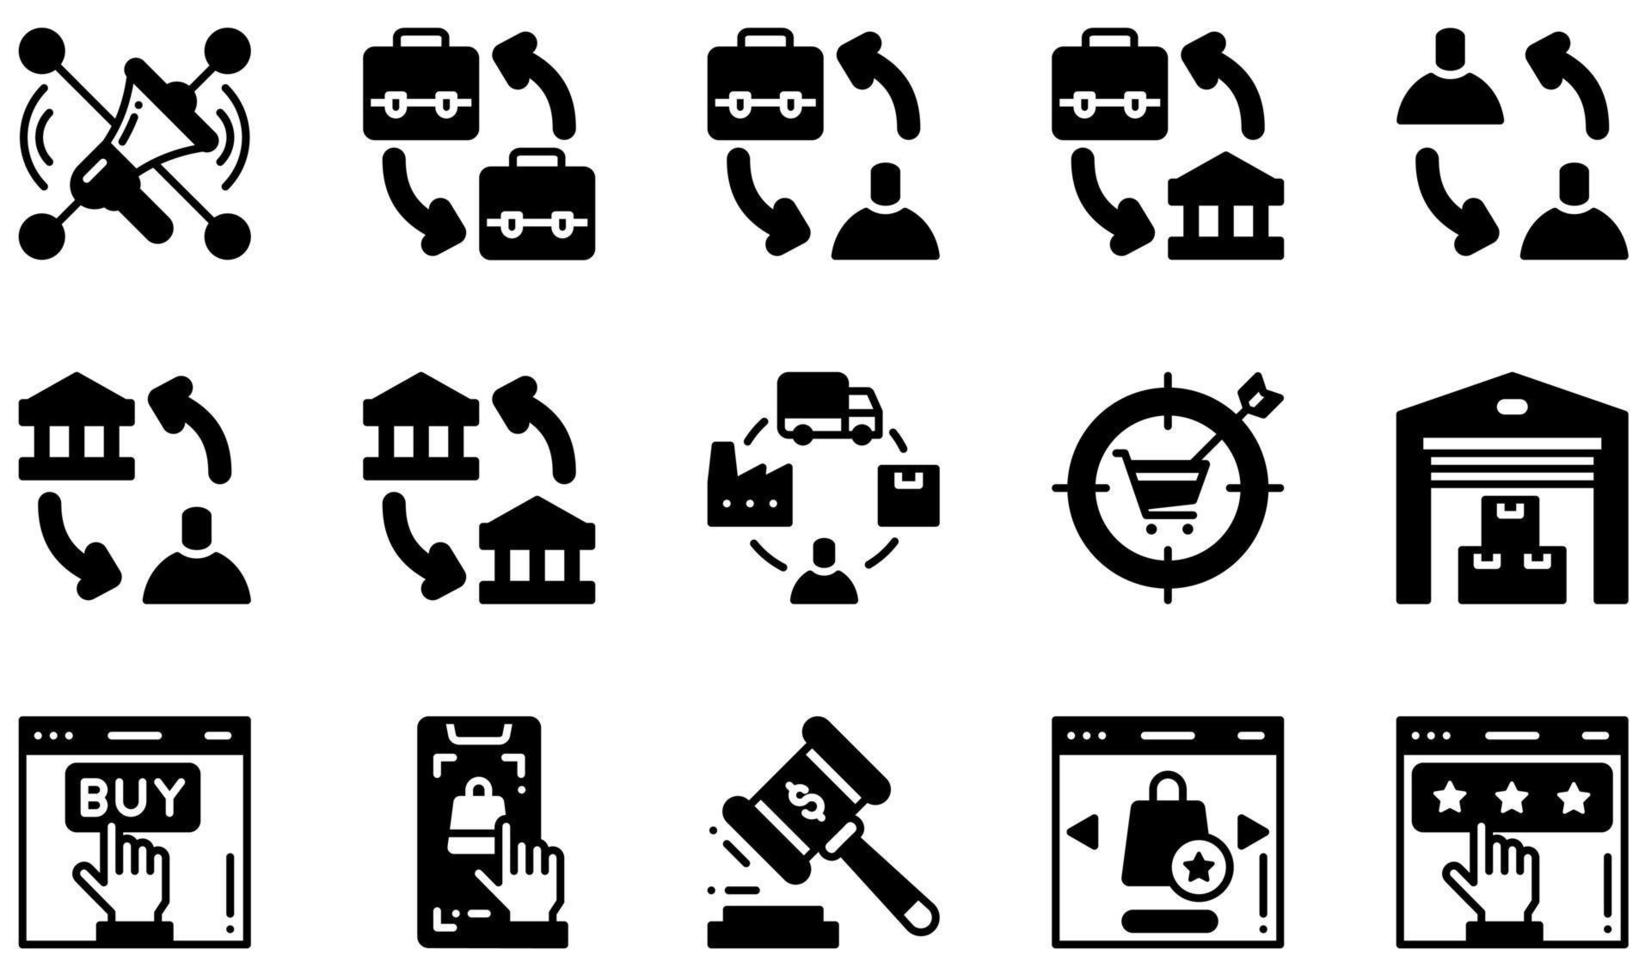 Set of Vector Icons Related to Ecommerce. Contains such Icons as SocialMarketing, B2b, B2c, Supply Chain, Warehouse, Quality and more.